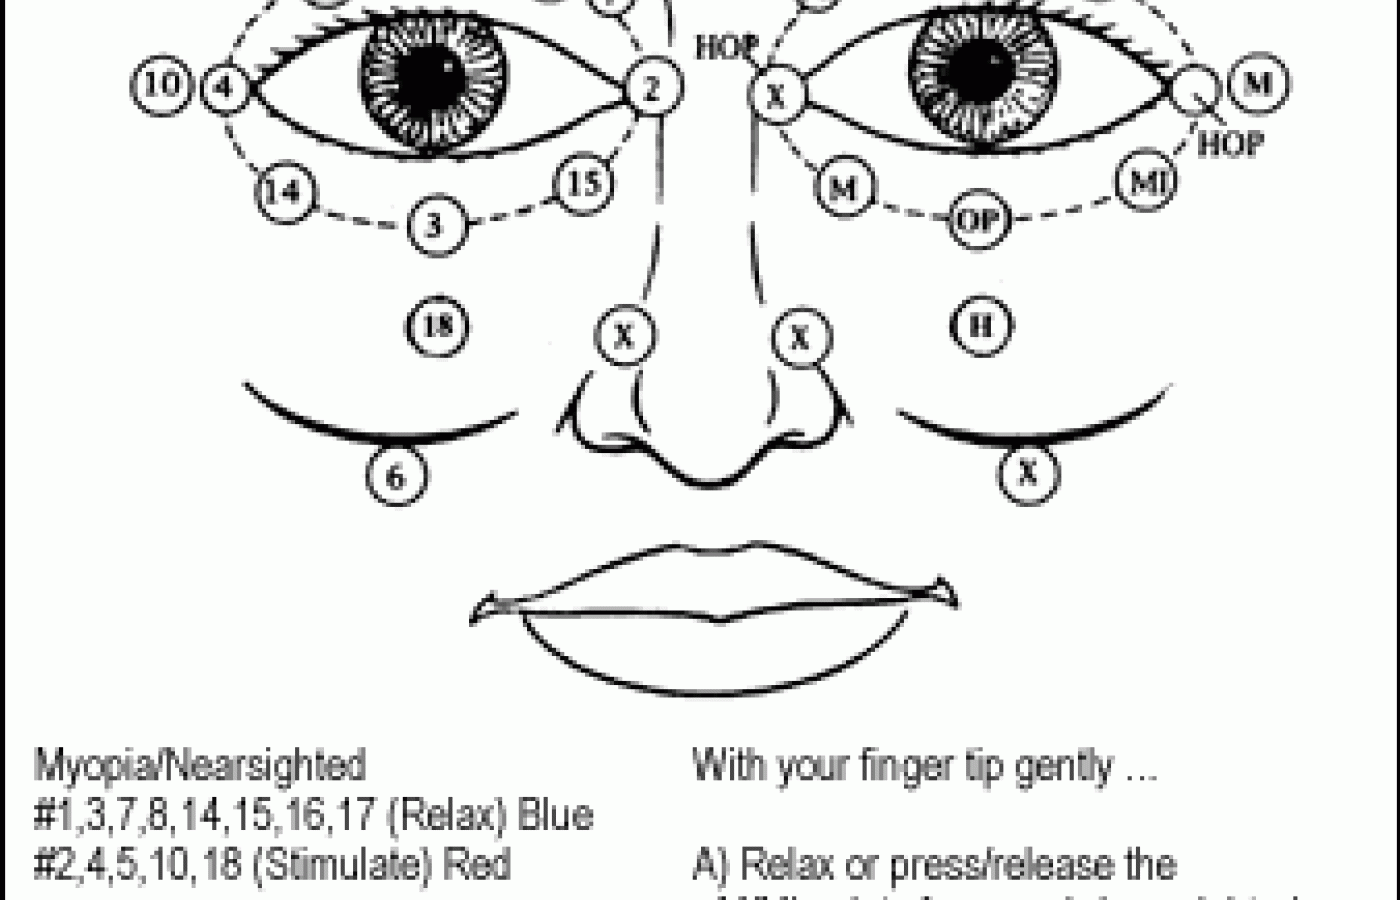 Diagram showing acupressure points surrounding each eye and cheek area.